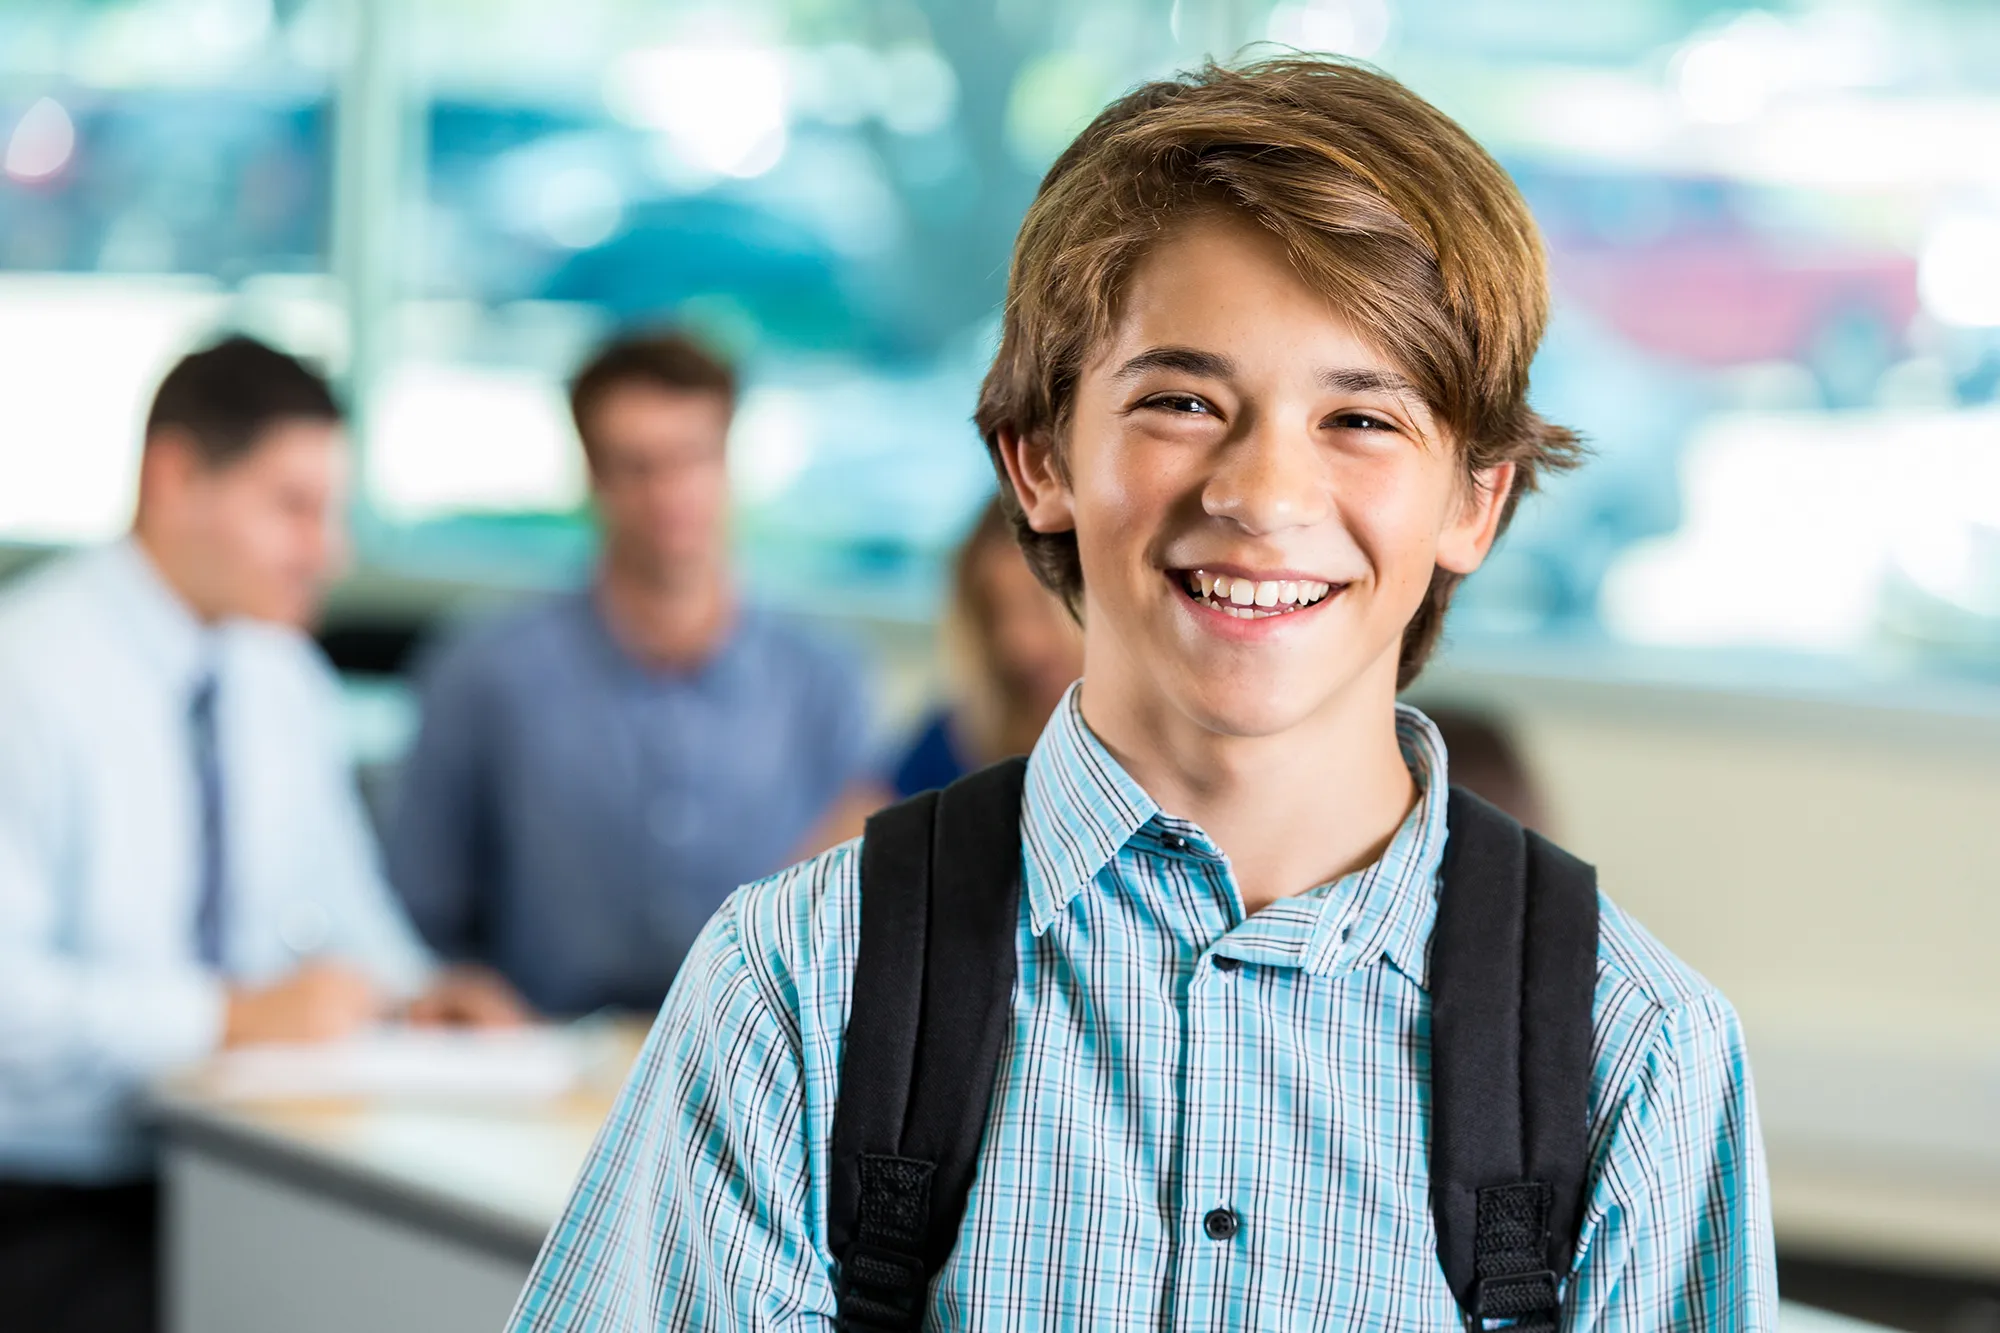 Young male student smiles at camera